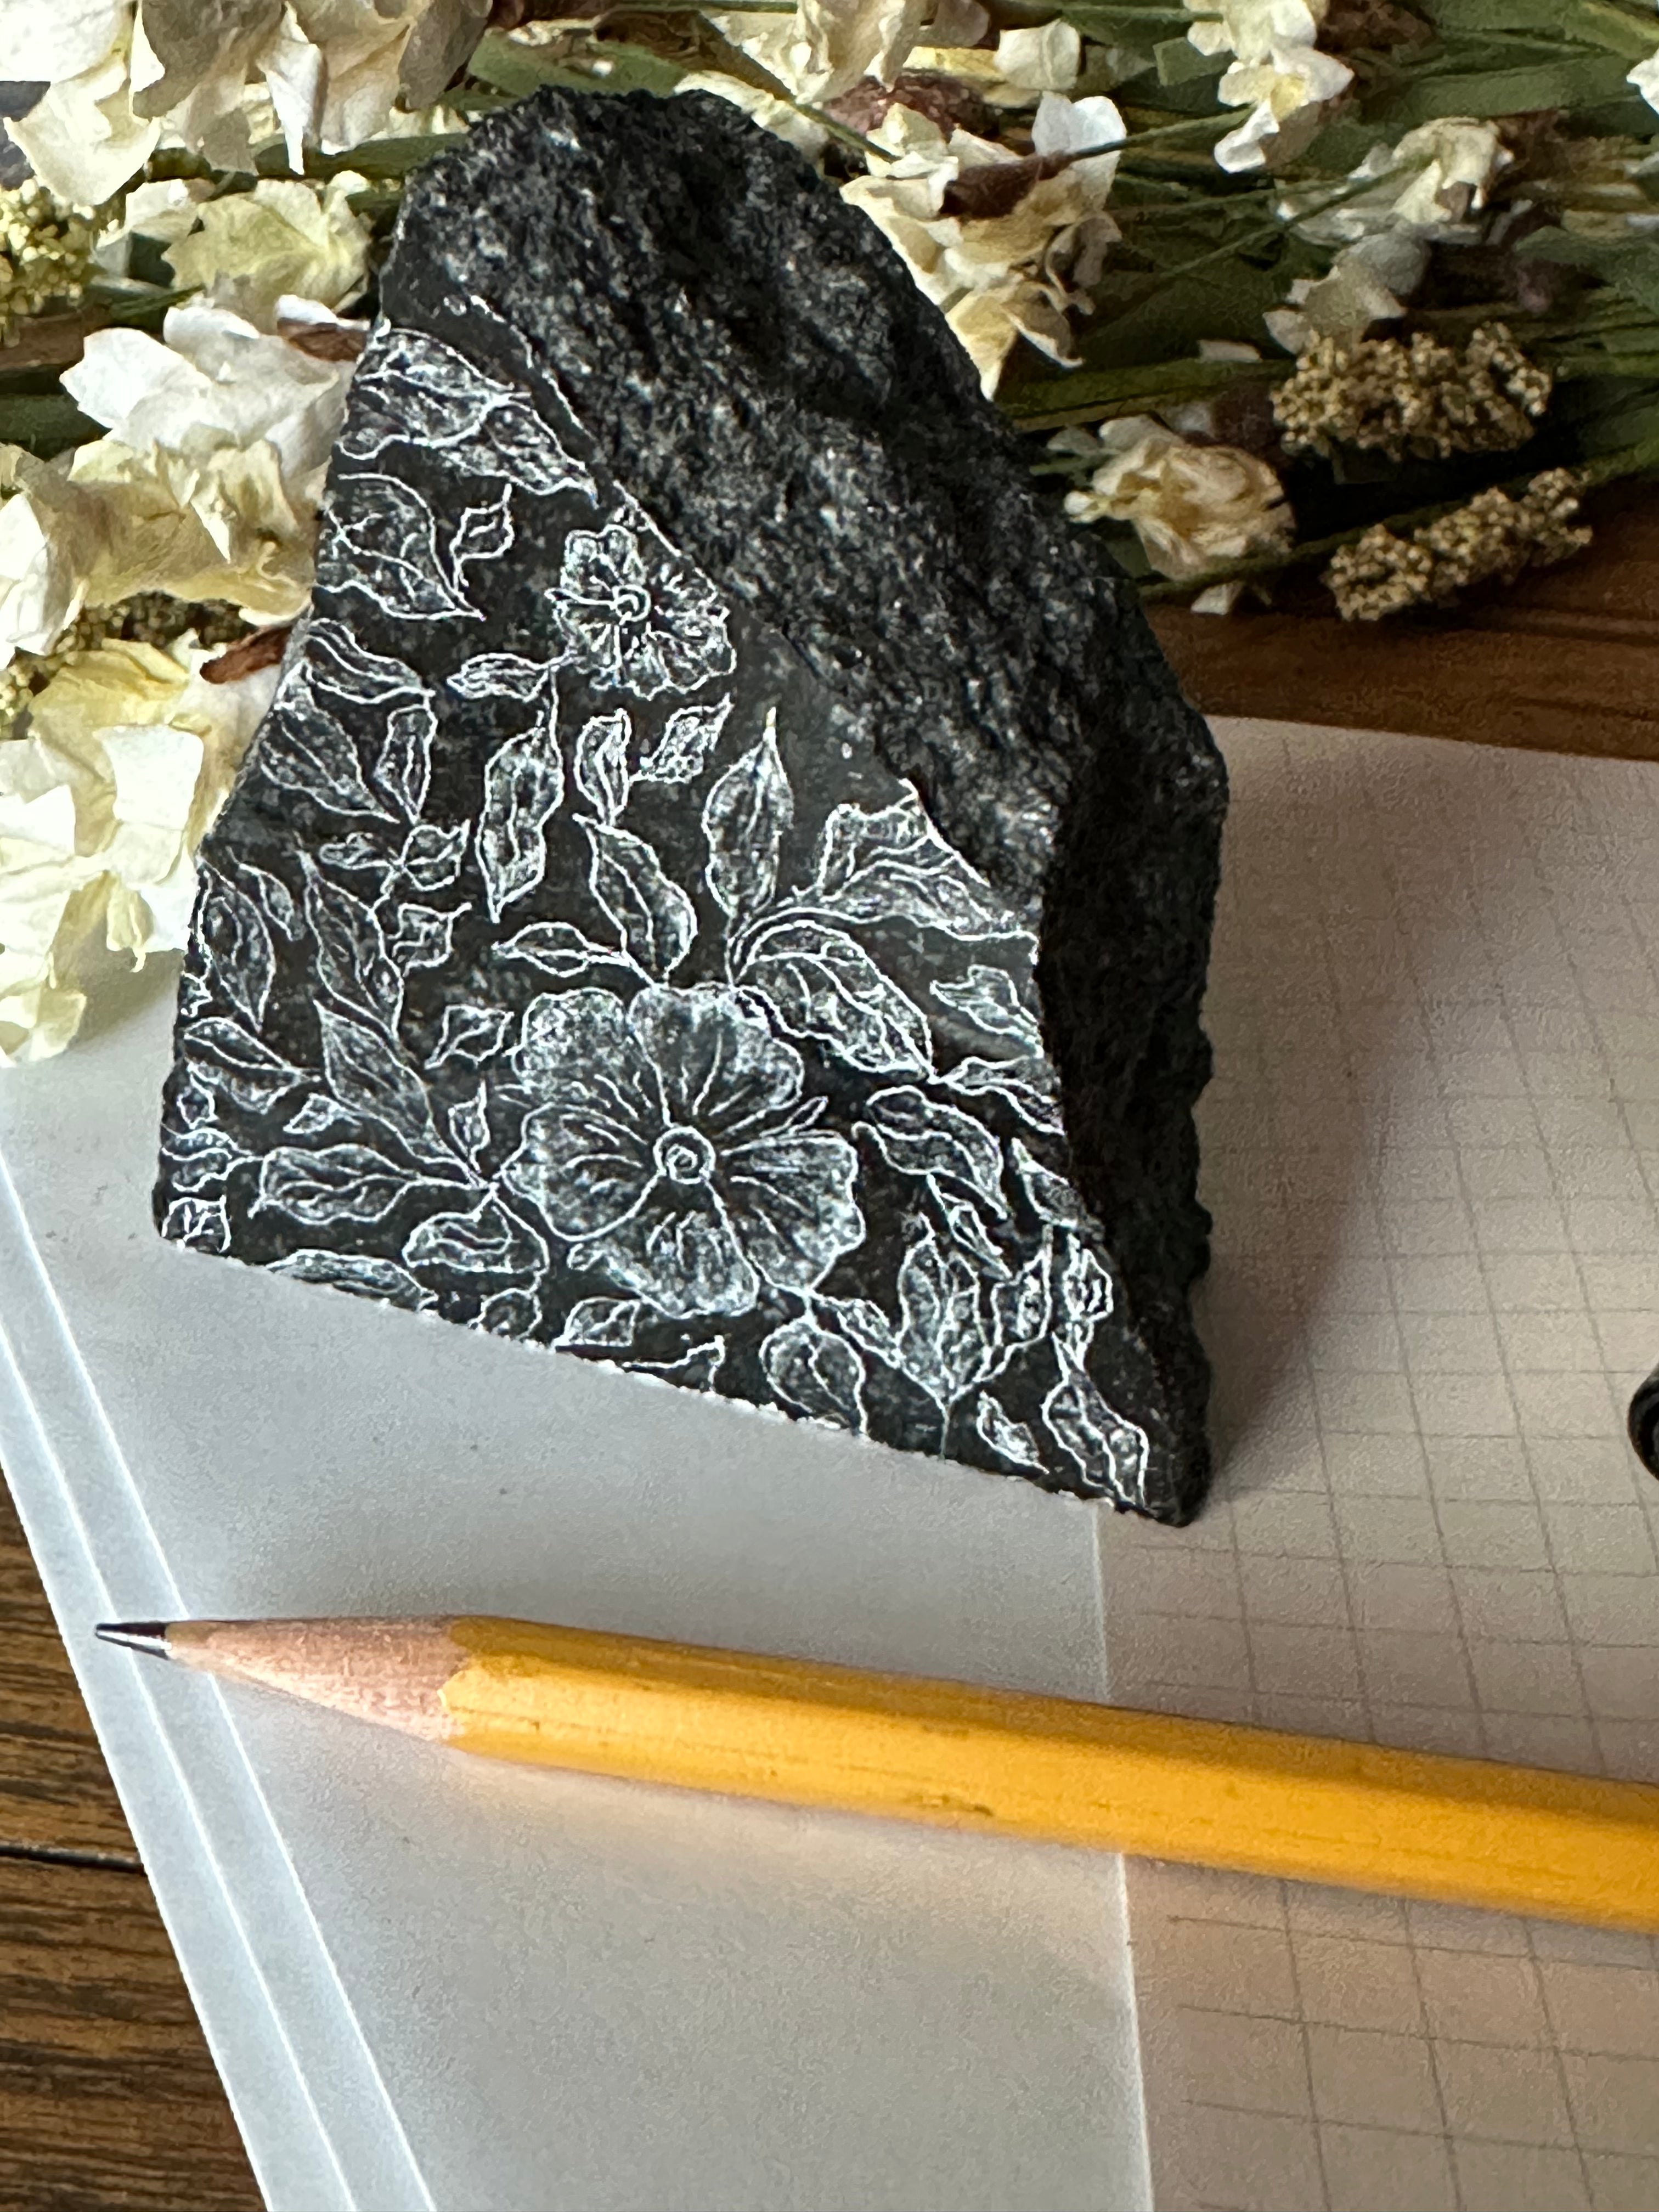 Etched Granite Paperweight -original, one-of-a-kind, bespoke, foliage, work from home, home office, gift, black granite